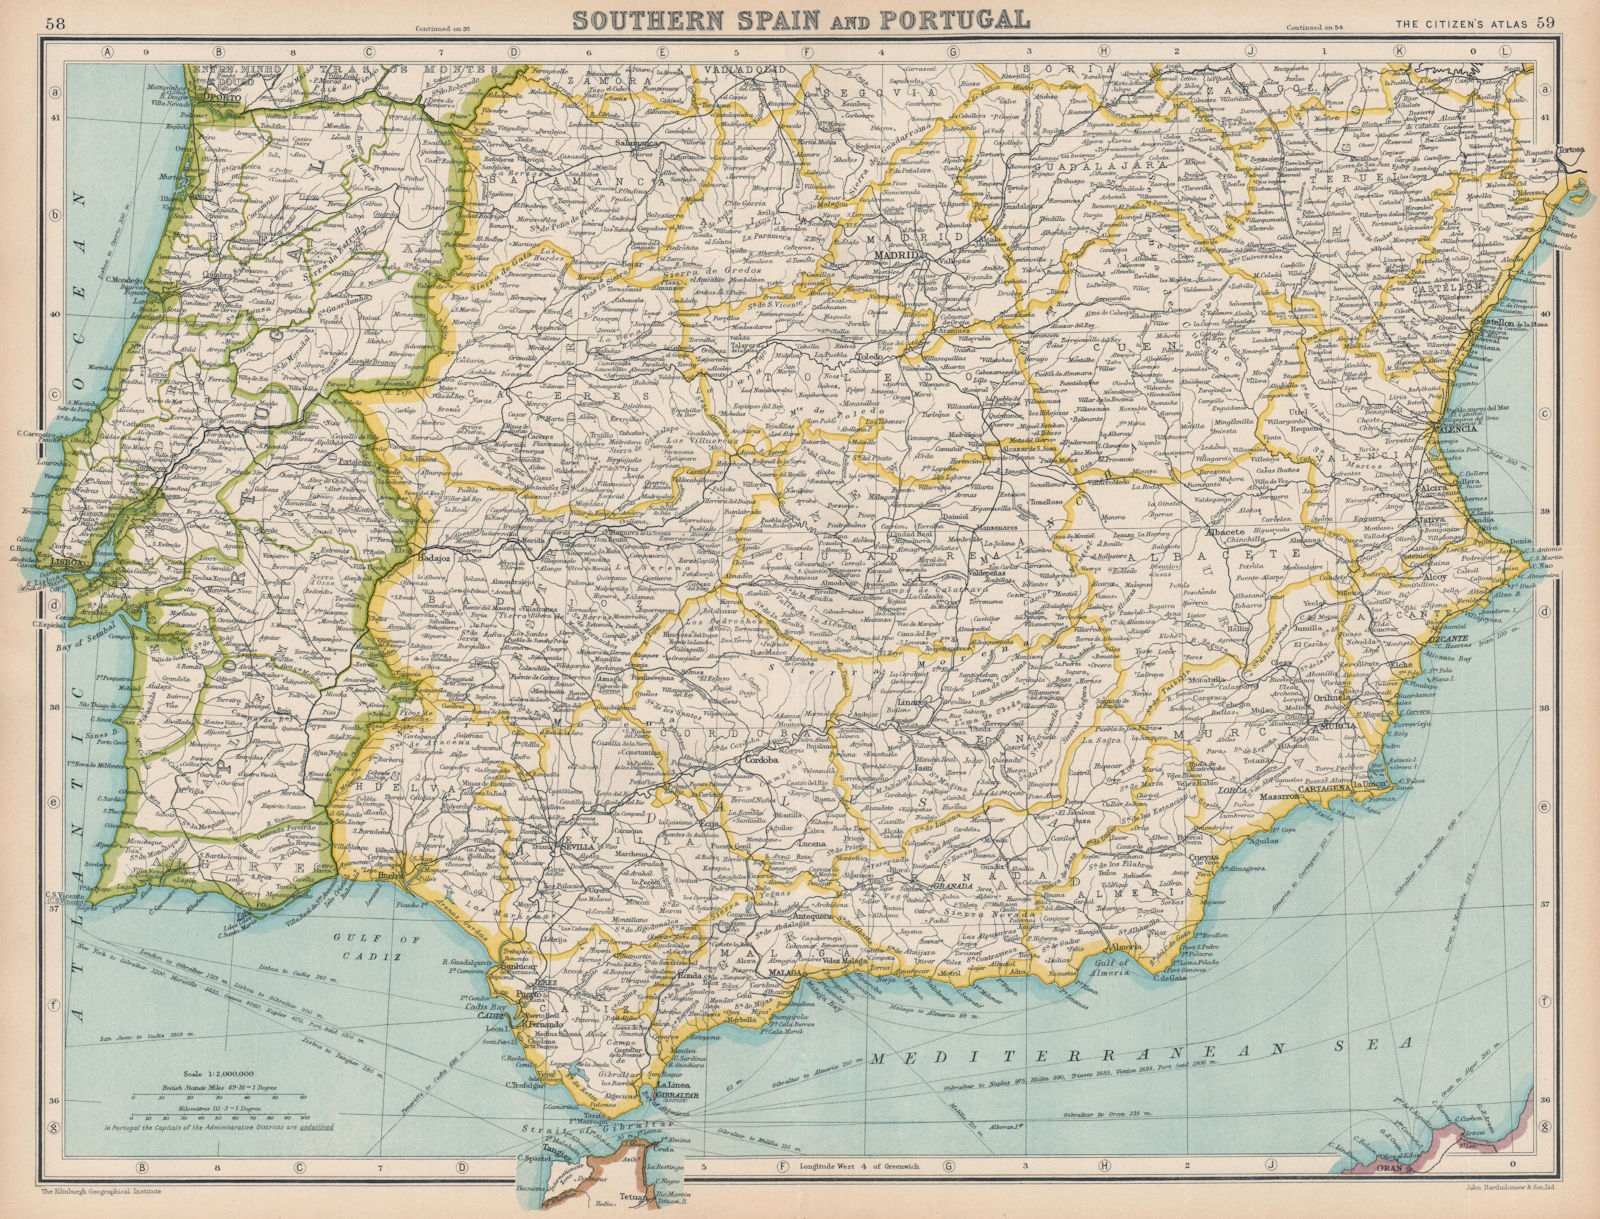 Associate Product IBERIA. Southern Spain and Portugal. BARTHOLOMEW 1924 old vintage map chart